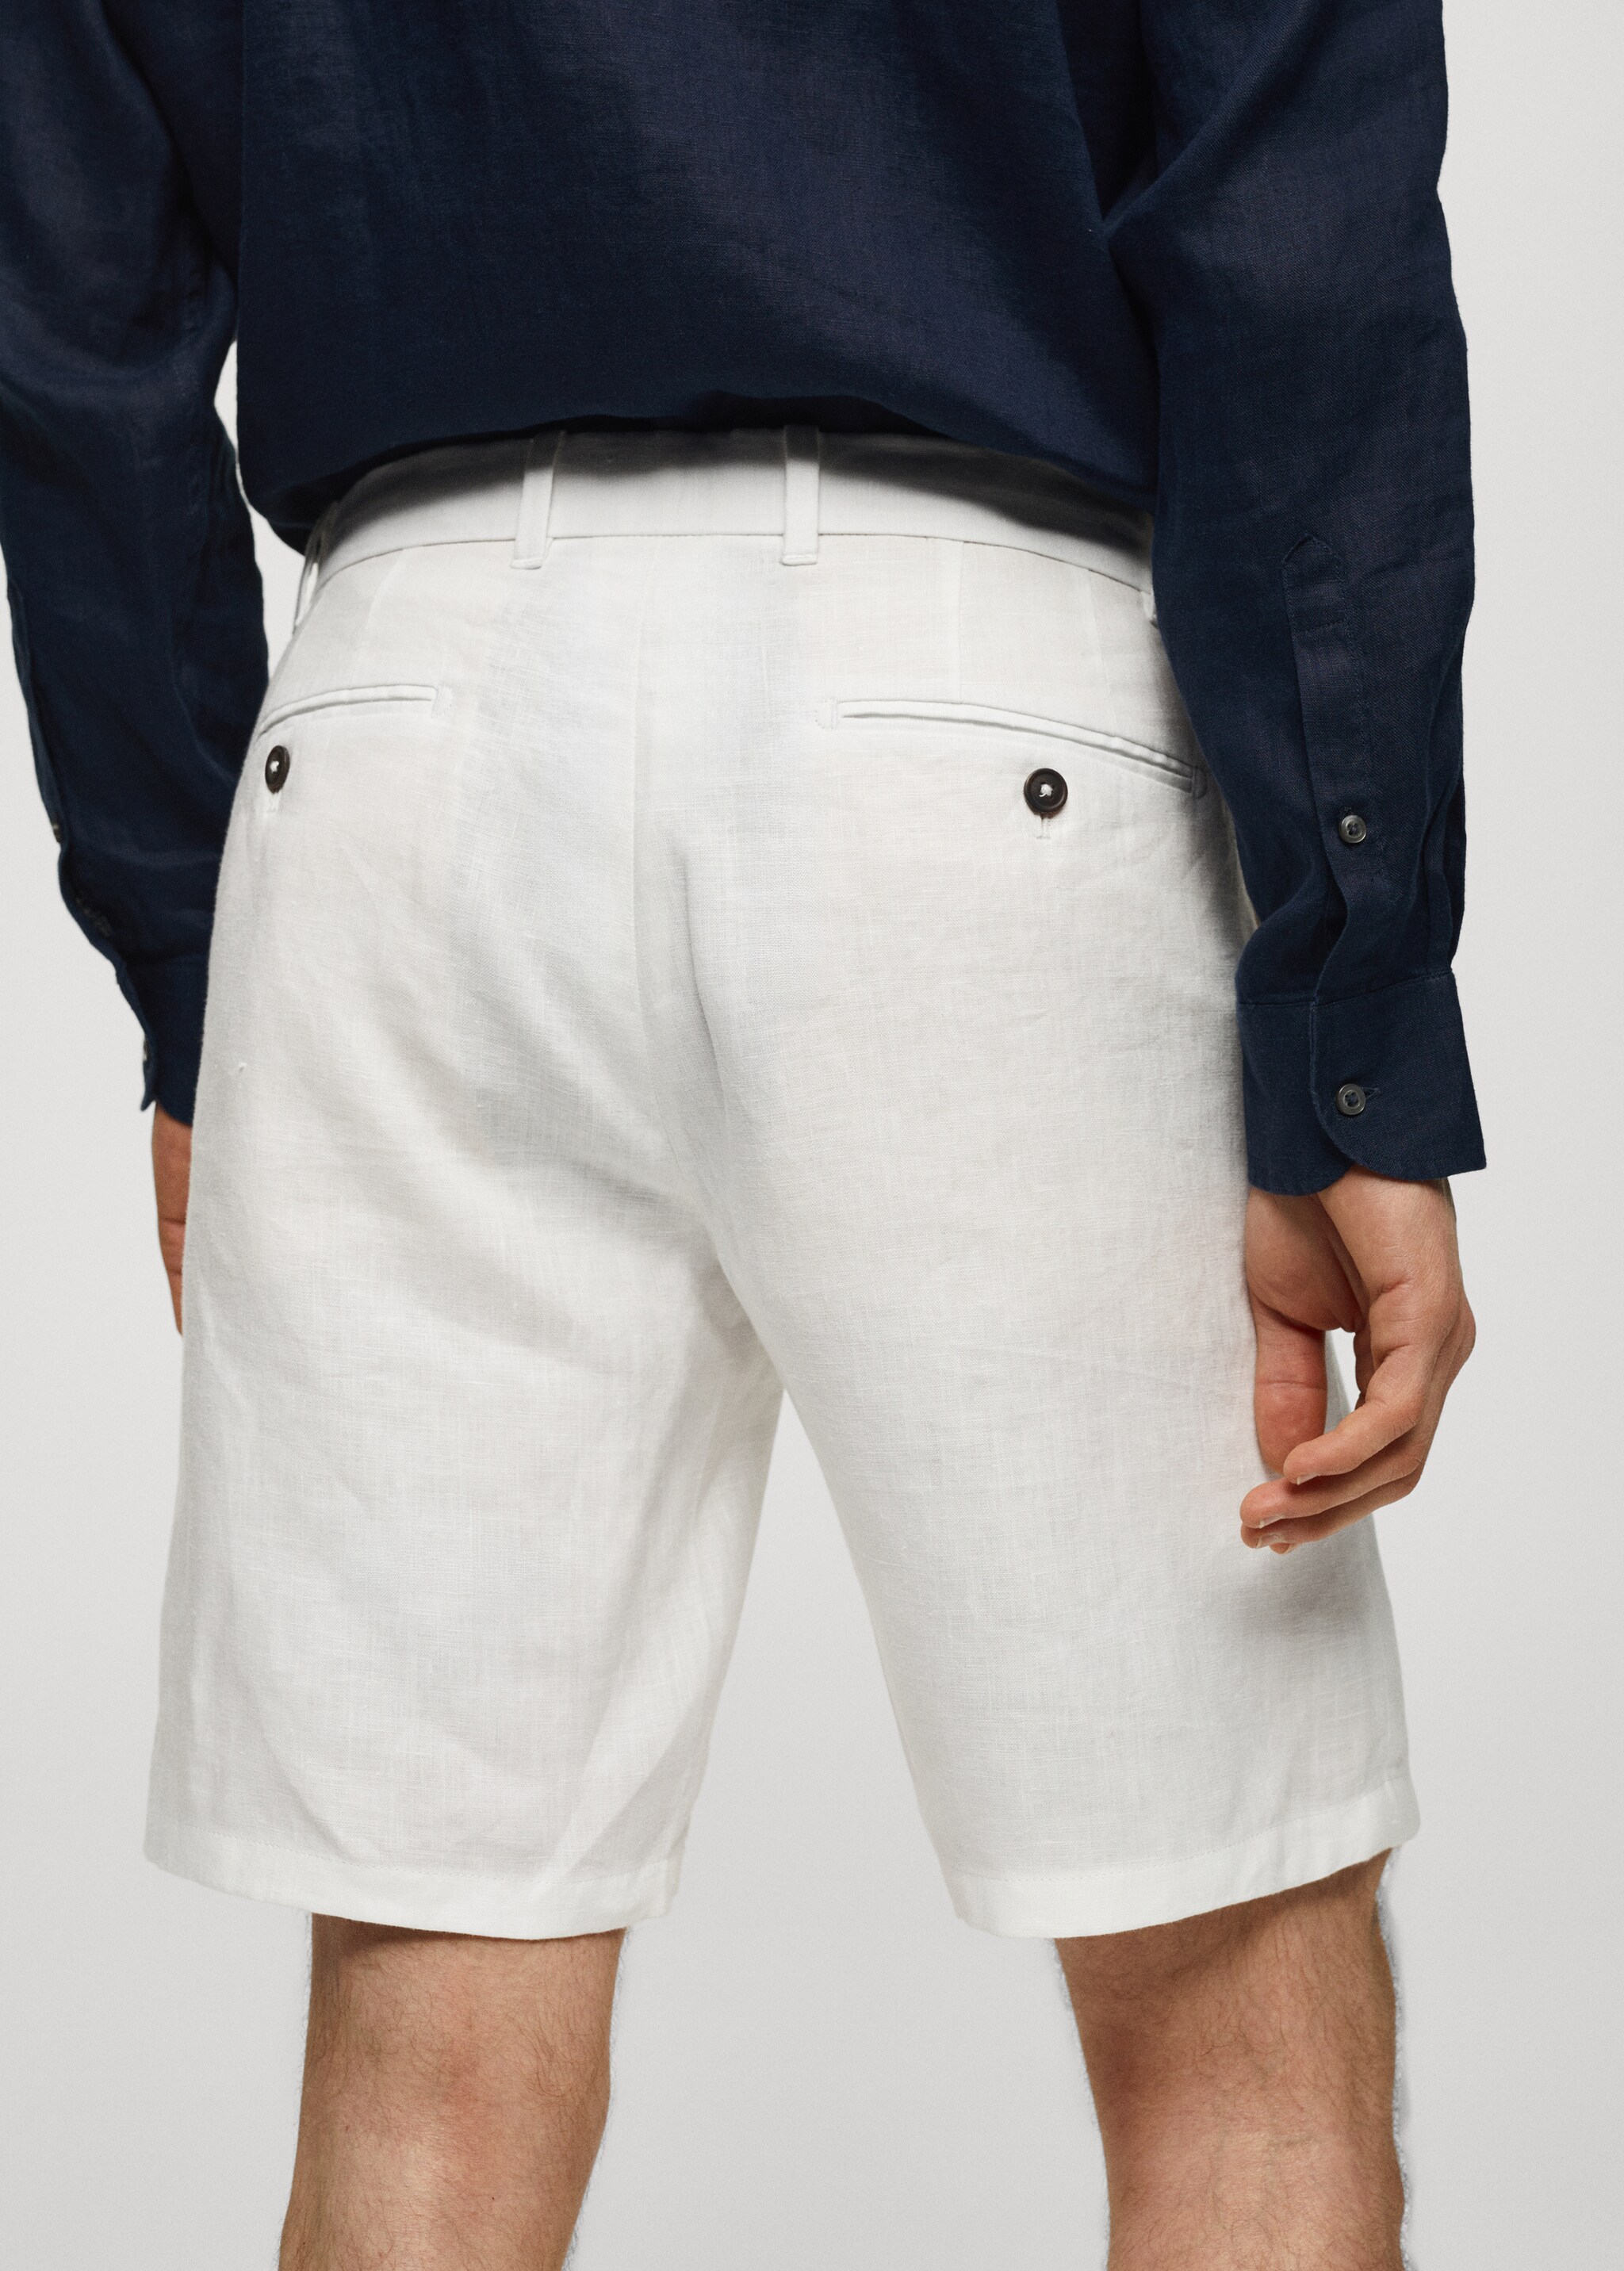 Slim fit 100% linen Bermuda shorts - Details of the article 4